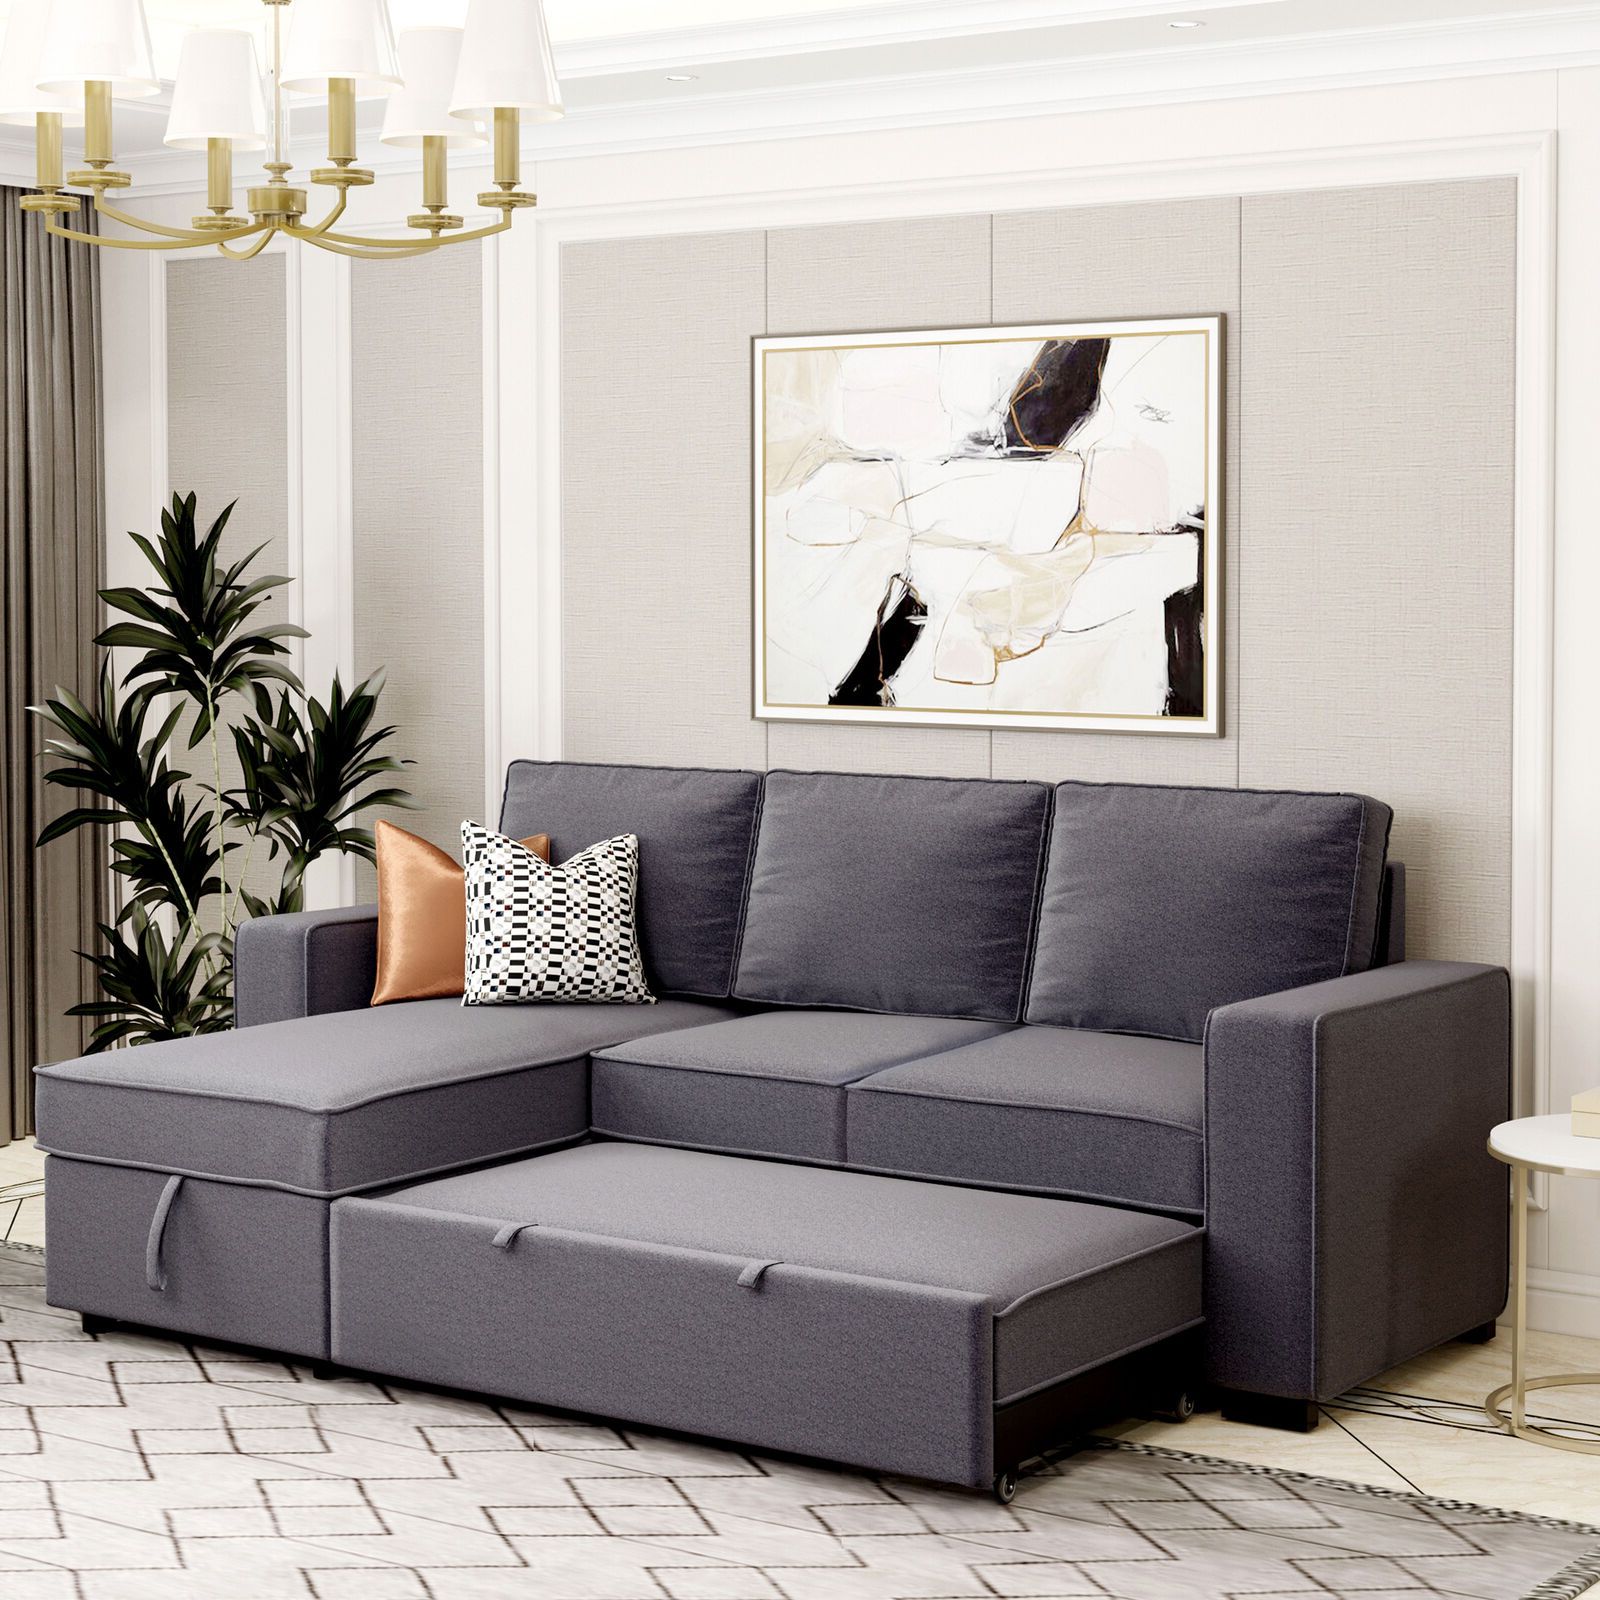 New Sectional Storage Sofa Bed 91" Reversible Pull Out Sleeper W/  Storage Chaise | Ebay Pertaining To Reversible Pull Out Sofa Couches (View 9 of 20)